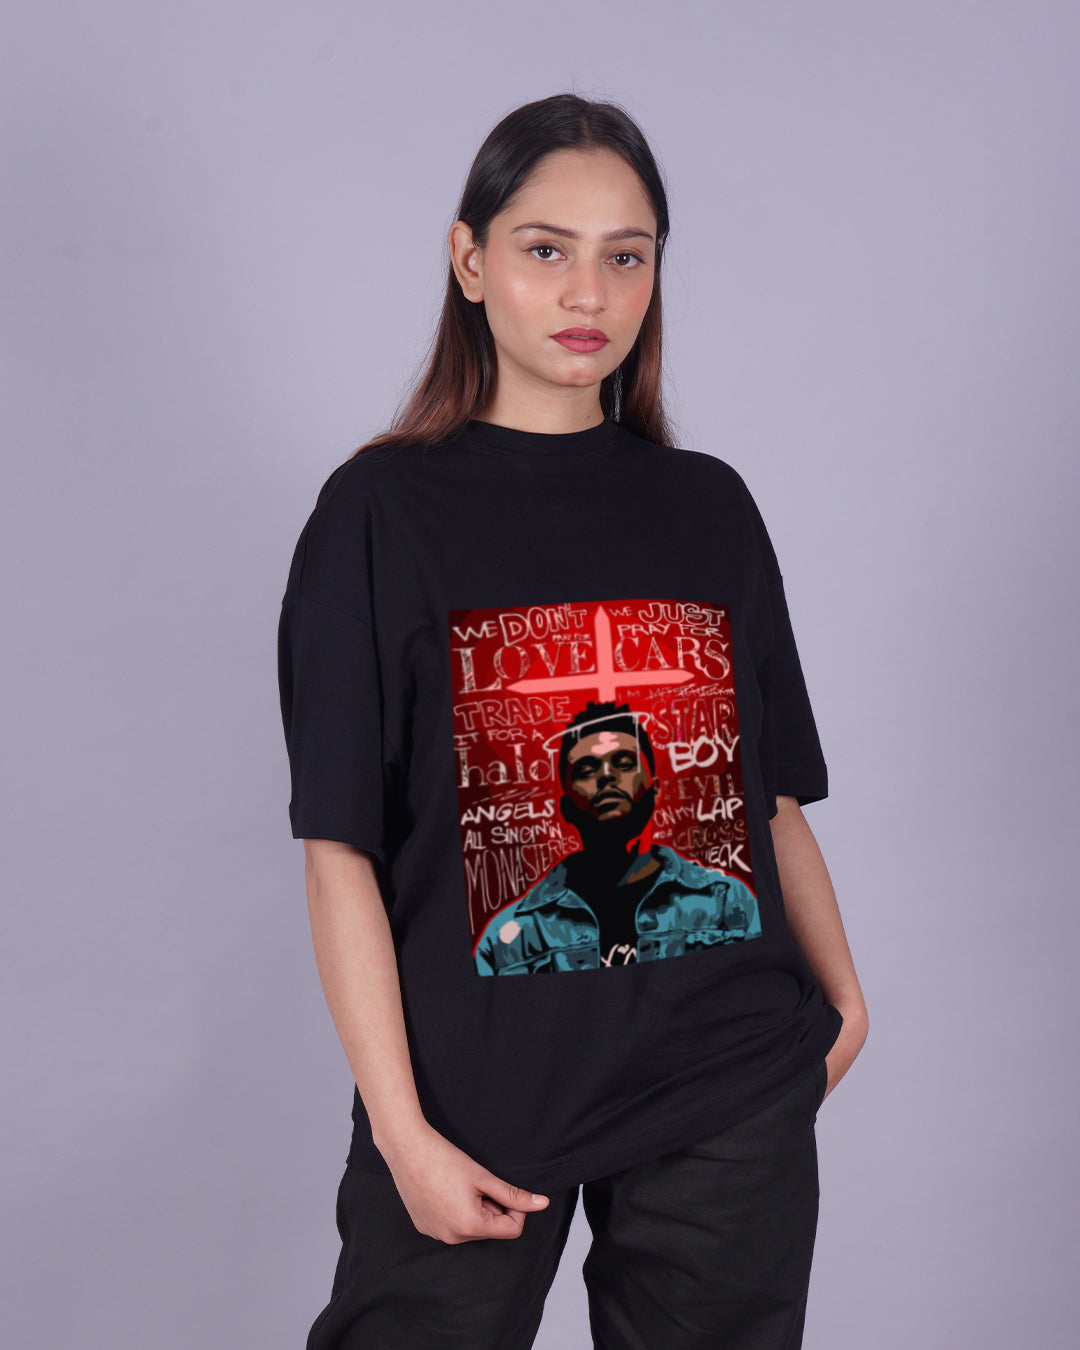 Trendy Pair: Women's The Weekend Oversized T-shirts - Starboy & After Hours